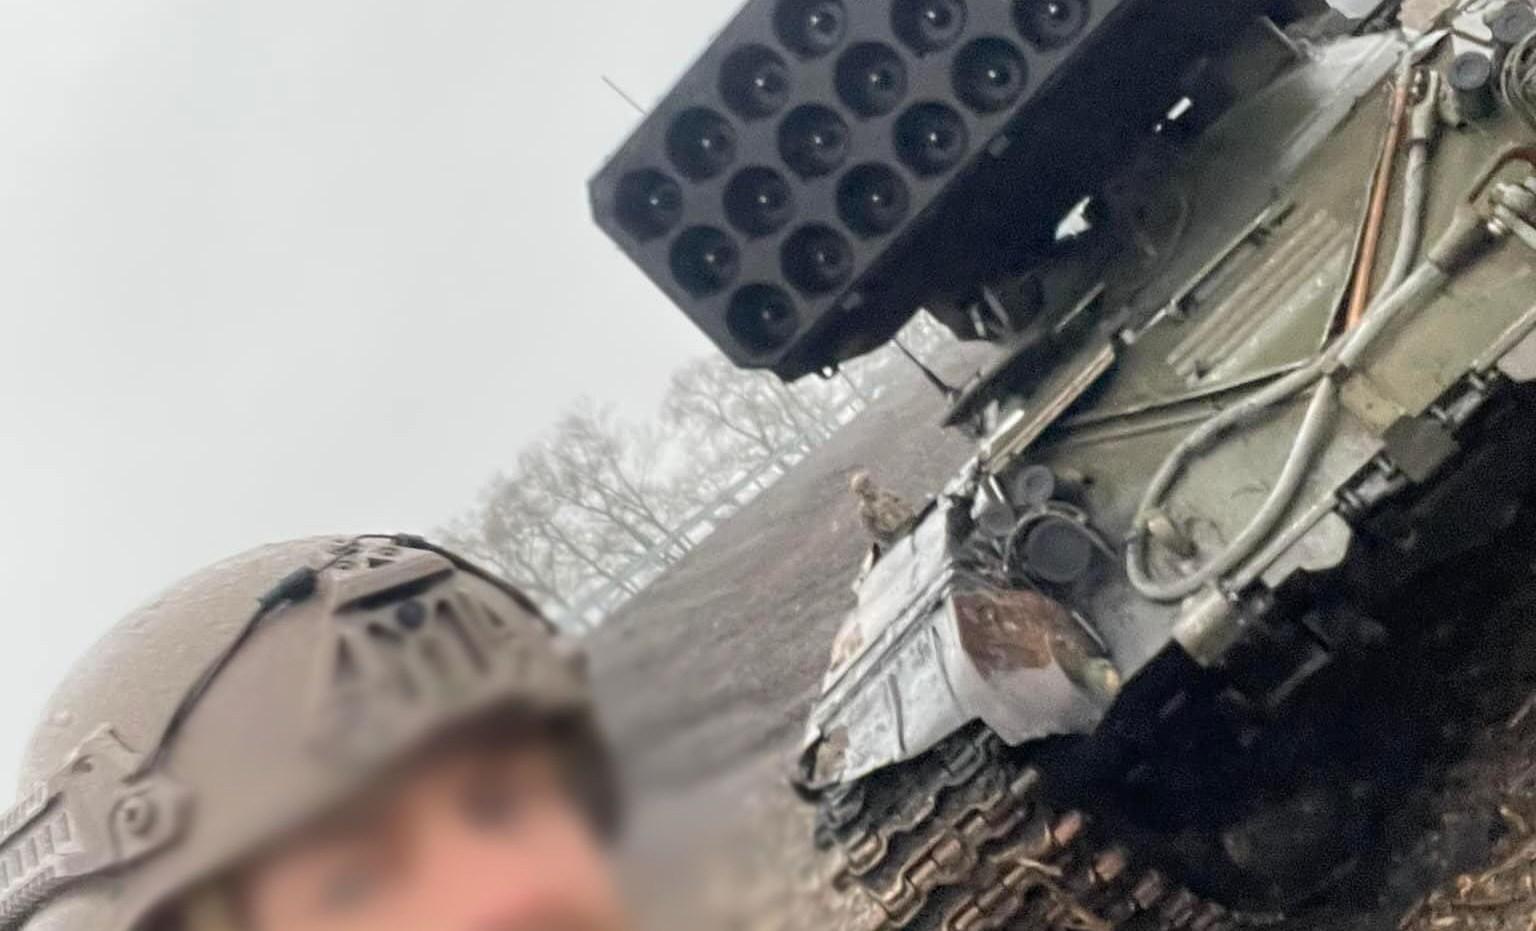 Russians use TOS-1A Solntsepyok systems in Ukraine